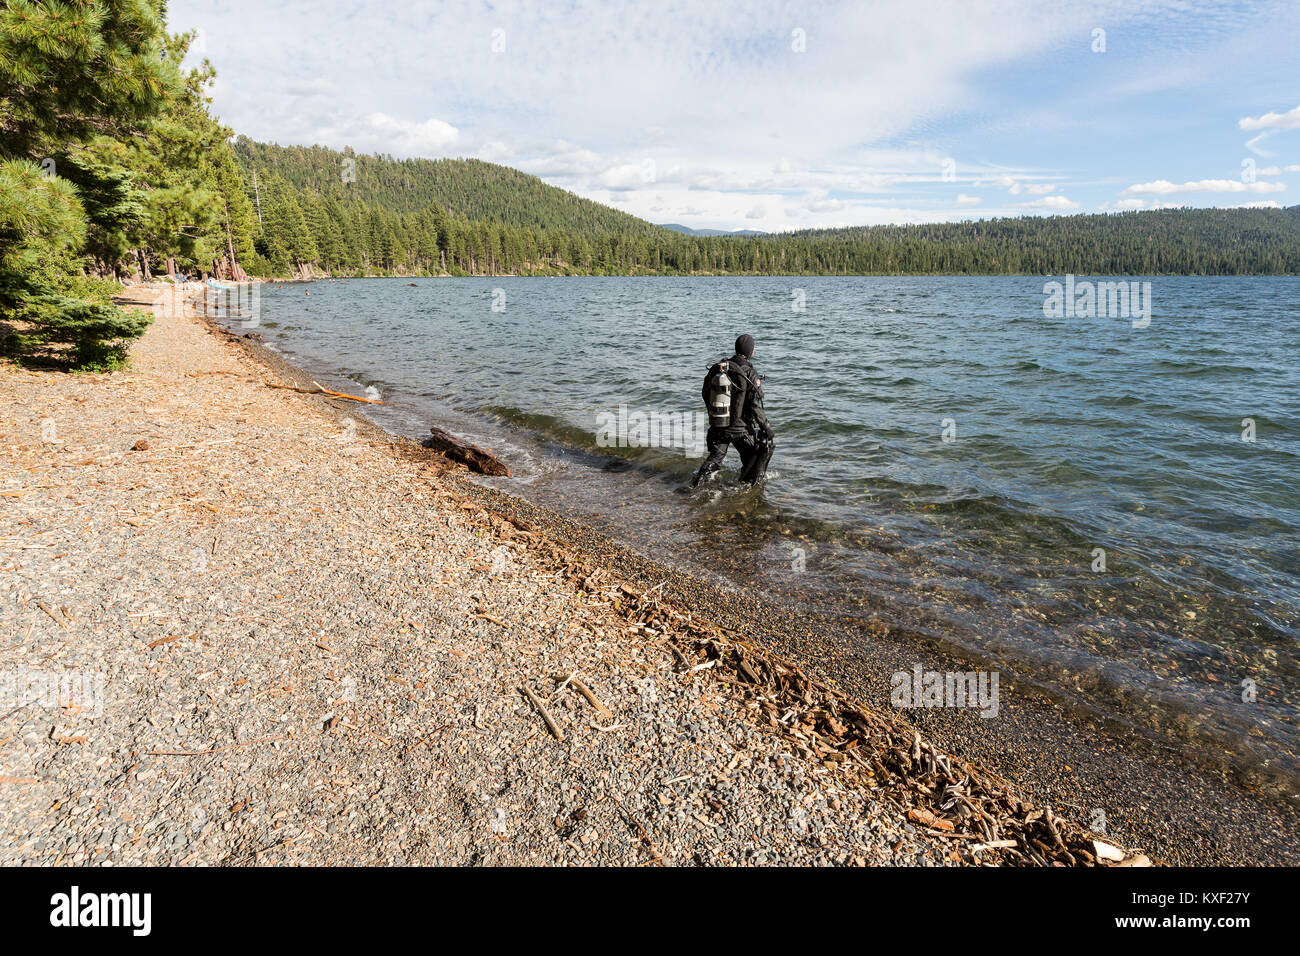 A scuba diver enters Fallen Leaf Lake in the Sierra Nevada Mountains for altitude diving. Stock Photo